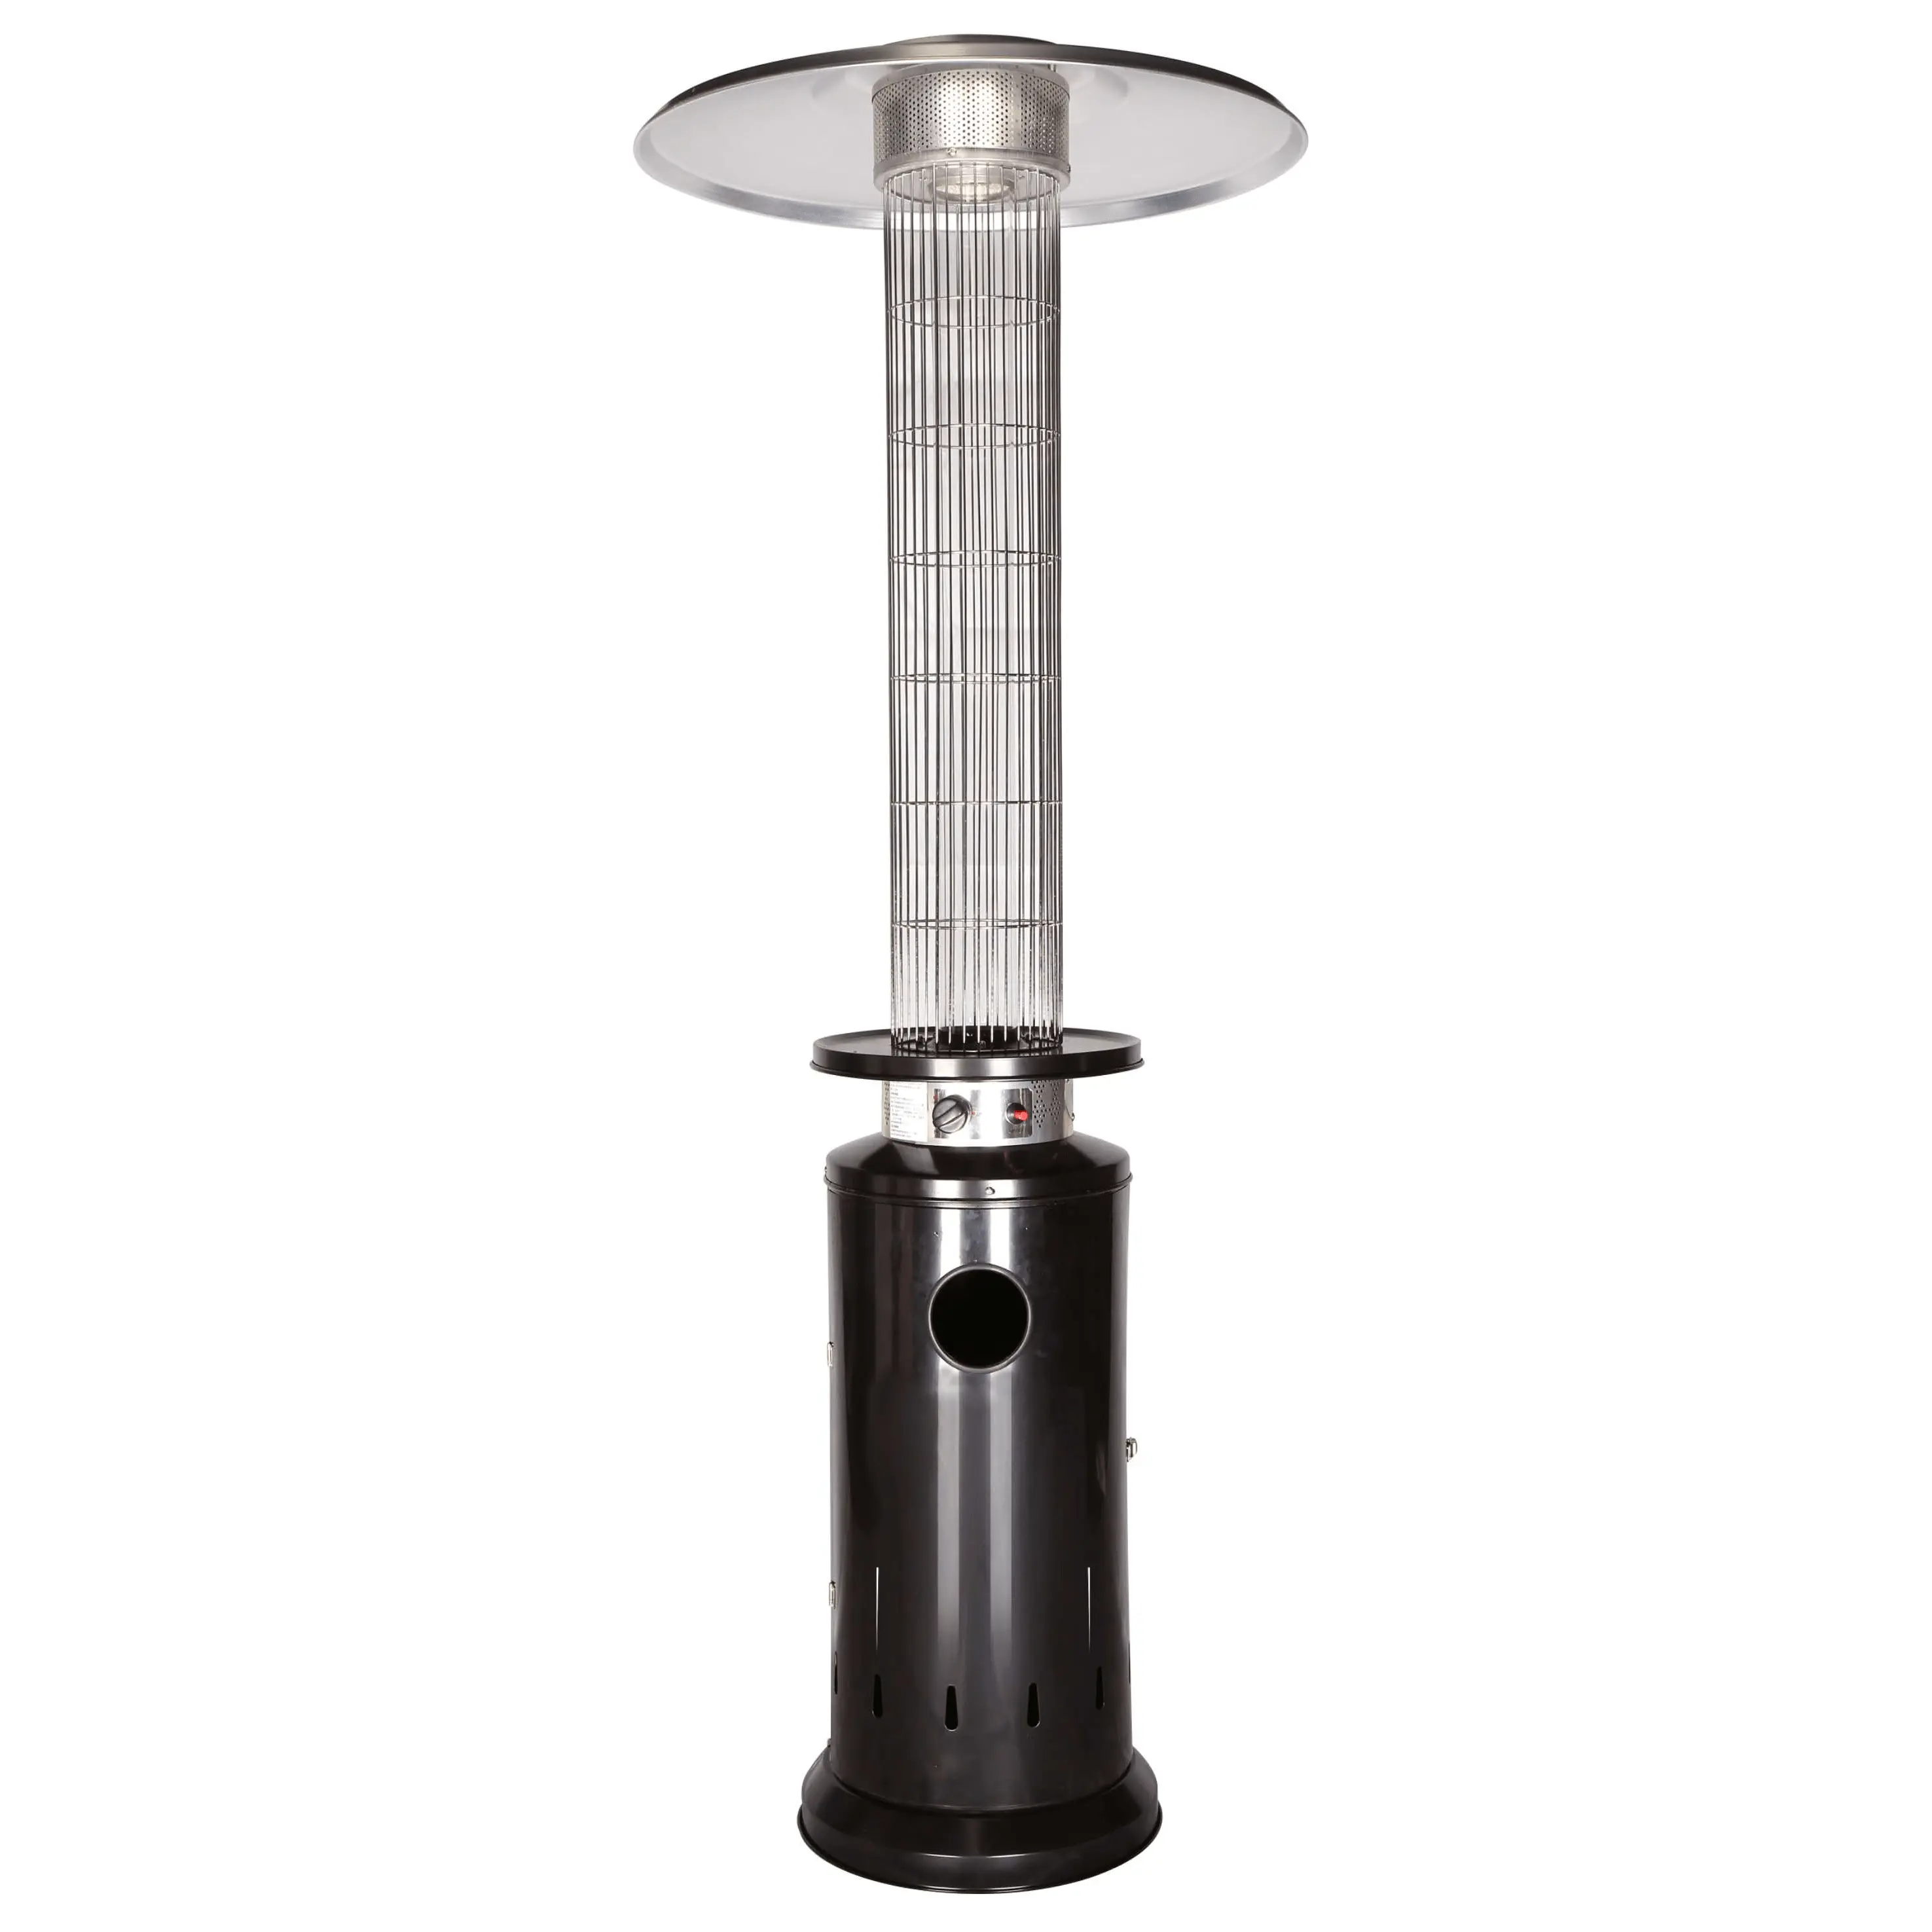 Lowes Commercial Iron Patio Heater Heating Device Propane Outdoor Propane Heater For Patio